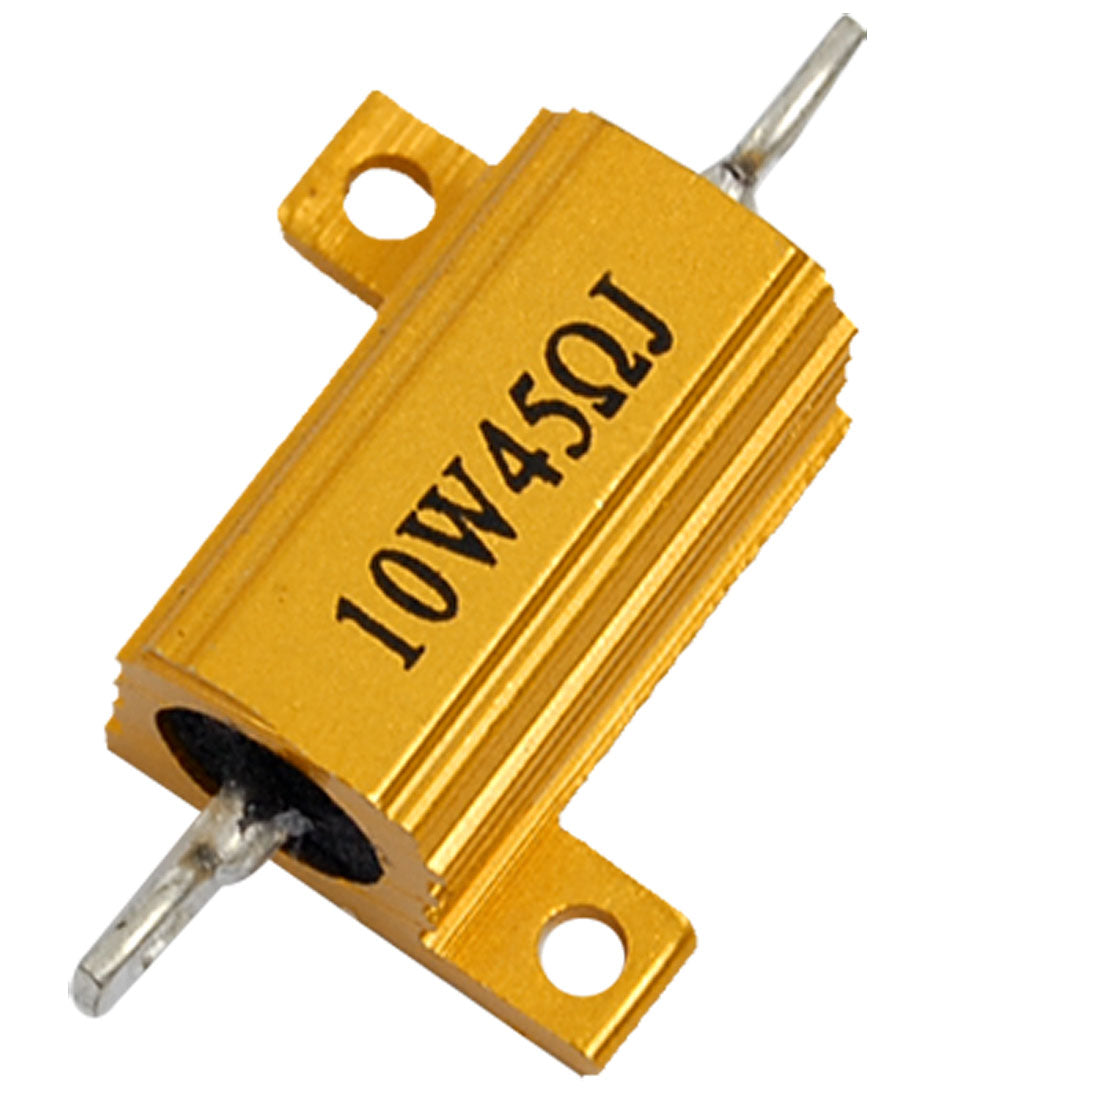 uxcell Uxcell 10W 45 Ohm 5% Aluminum Clad Wire Wound Resistor Gold Tone